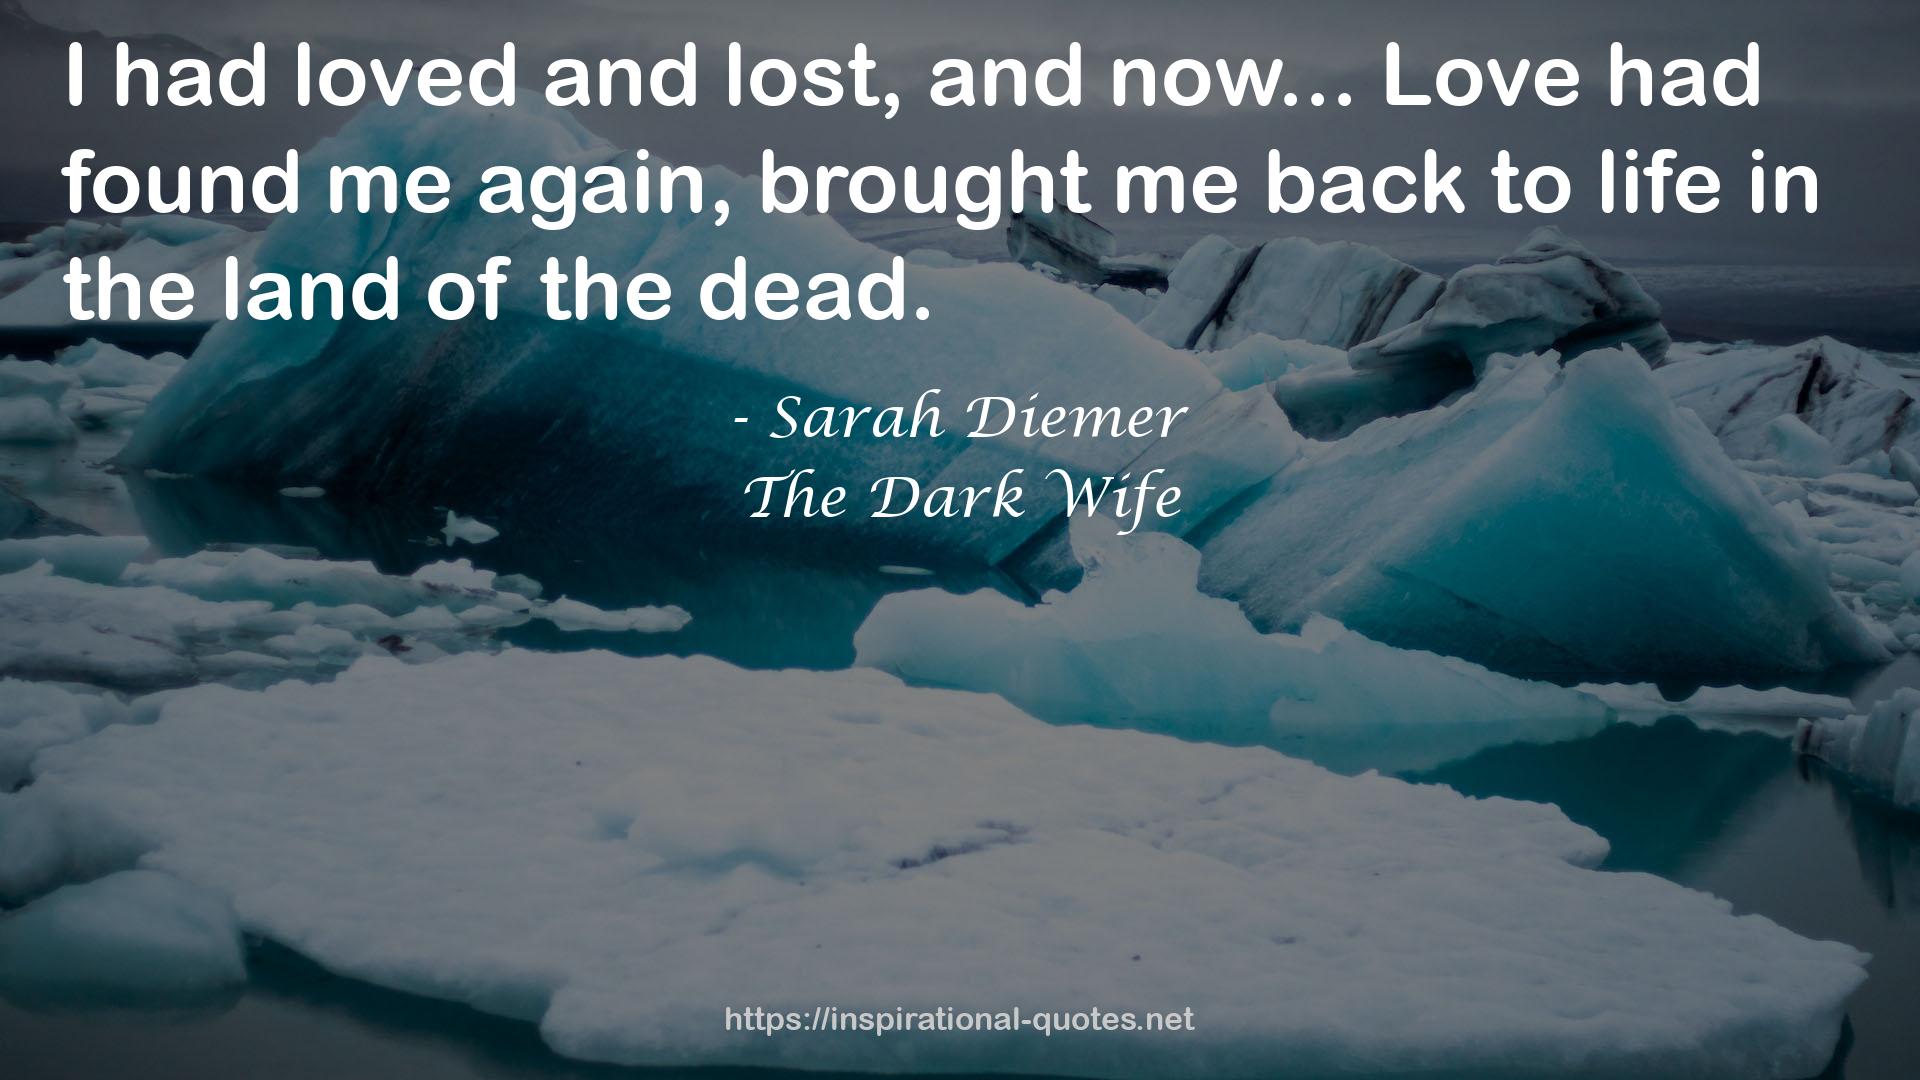 The Dark Wife QUOTES